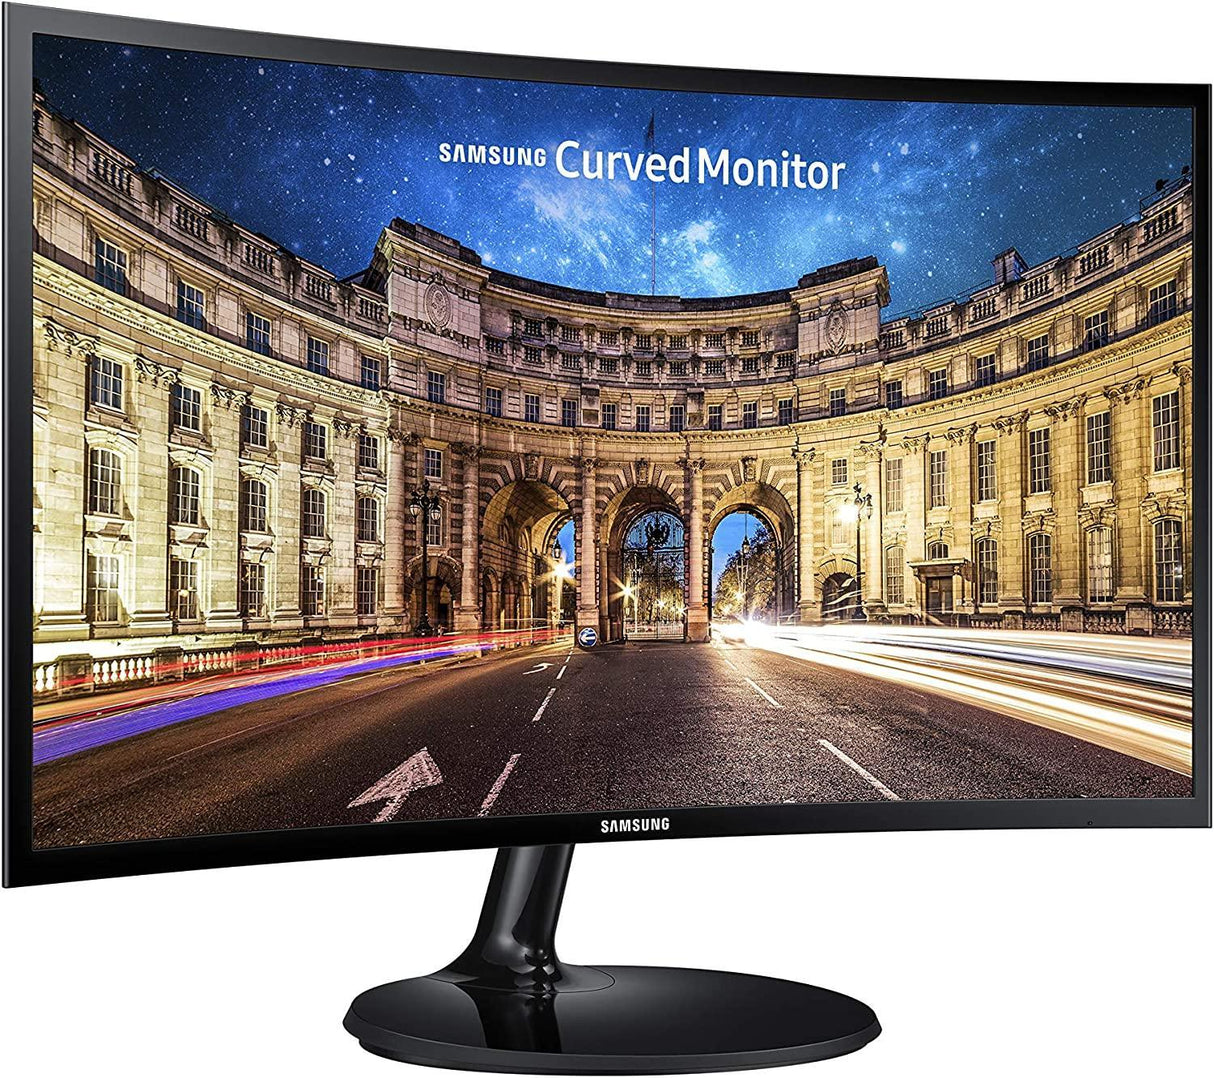 SAMSUNG LC24F390FHNXZA 24-inch Curved LED Gaming Monitor (Super Slim Design), 60Hz Refresh Rate w/AMD FreeSync Game Mode